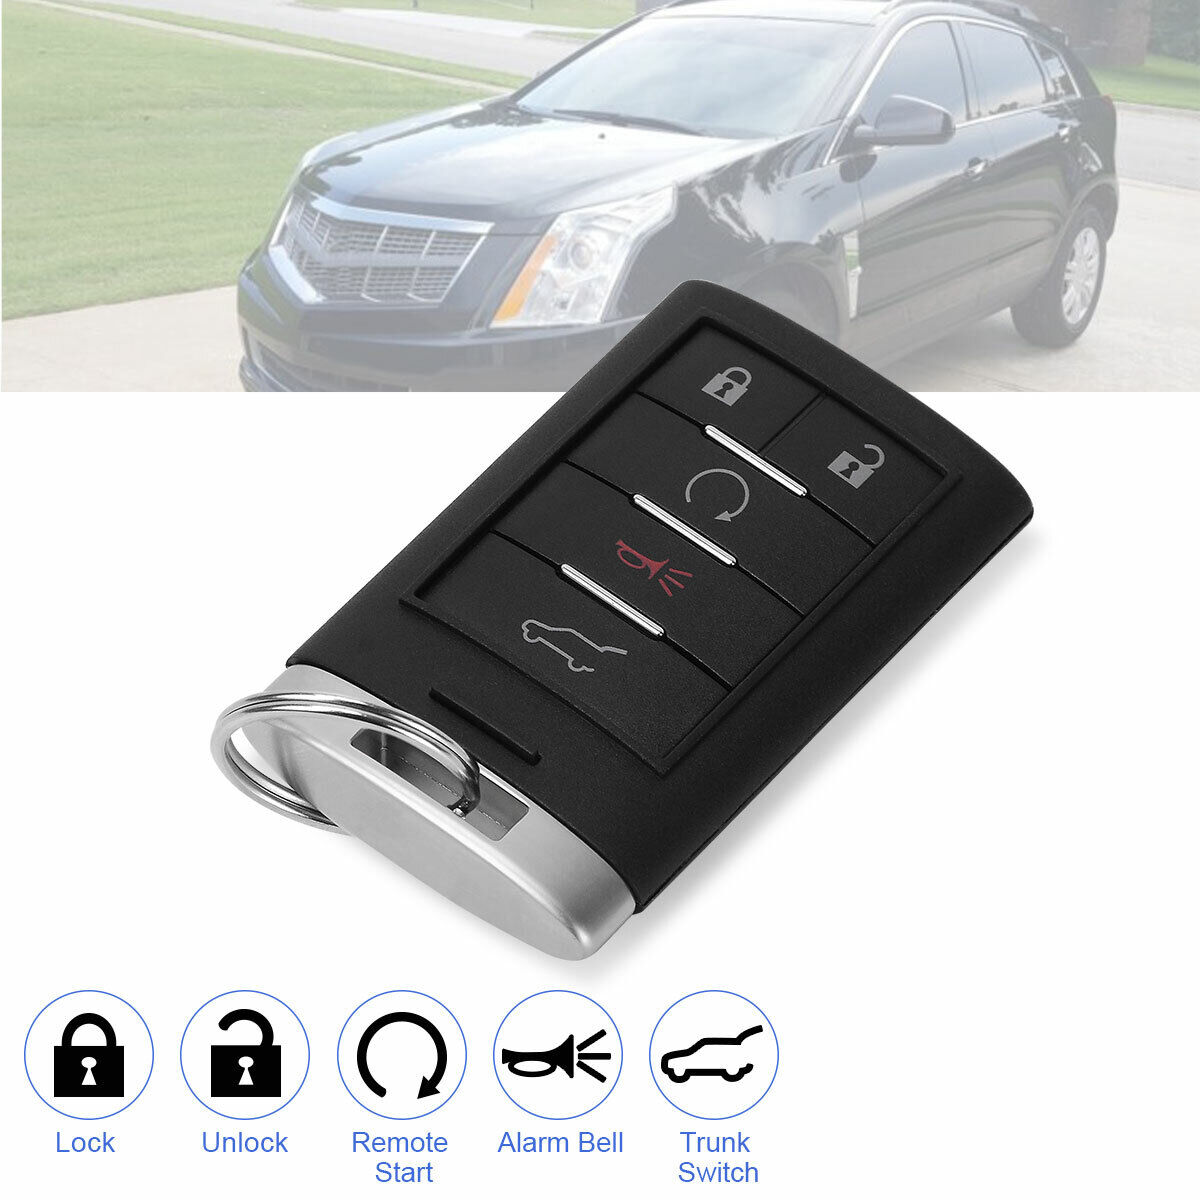 Replacement for Cadillac SRX 2010 2011 2012 2013 2014 2015 Keyless Remote Key